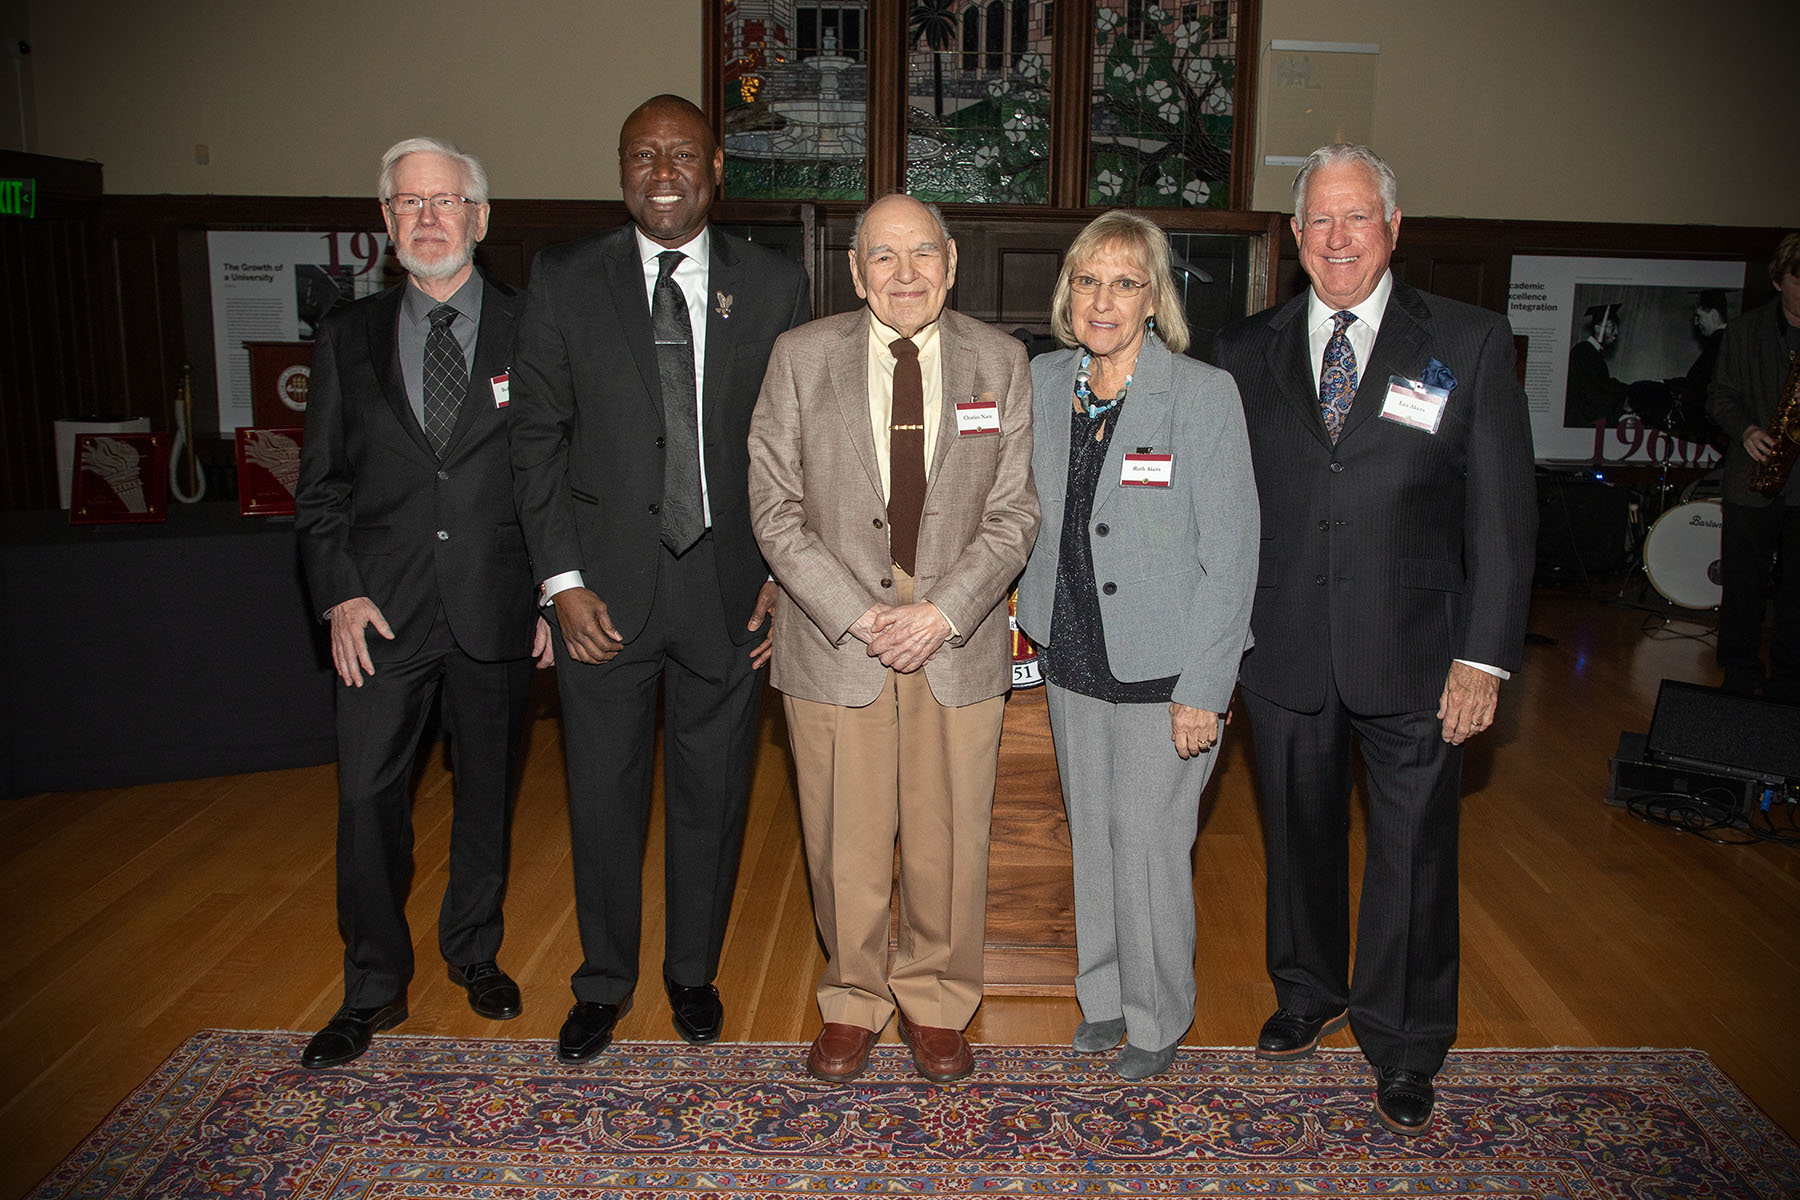 (From L to R) Bob Howard, Ben Crump, Charles Nam, Ruth and Les Akers. (FSU Photography Services)